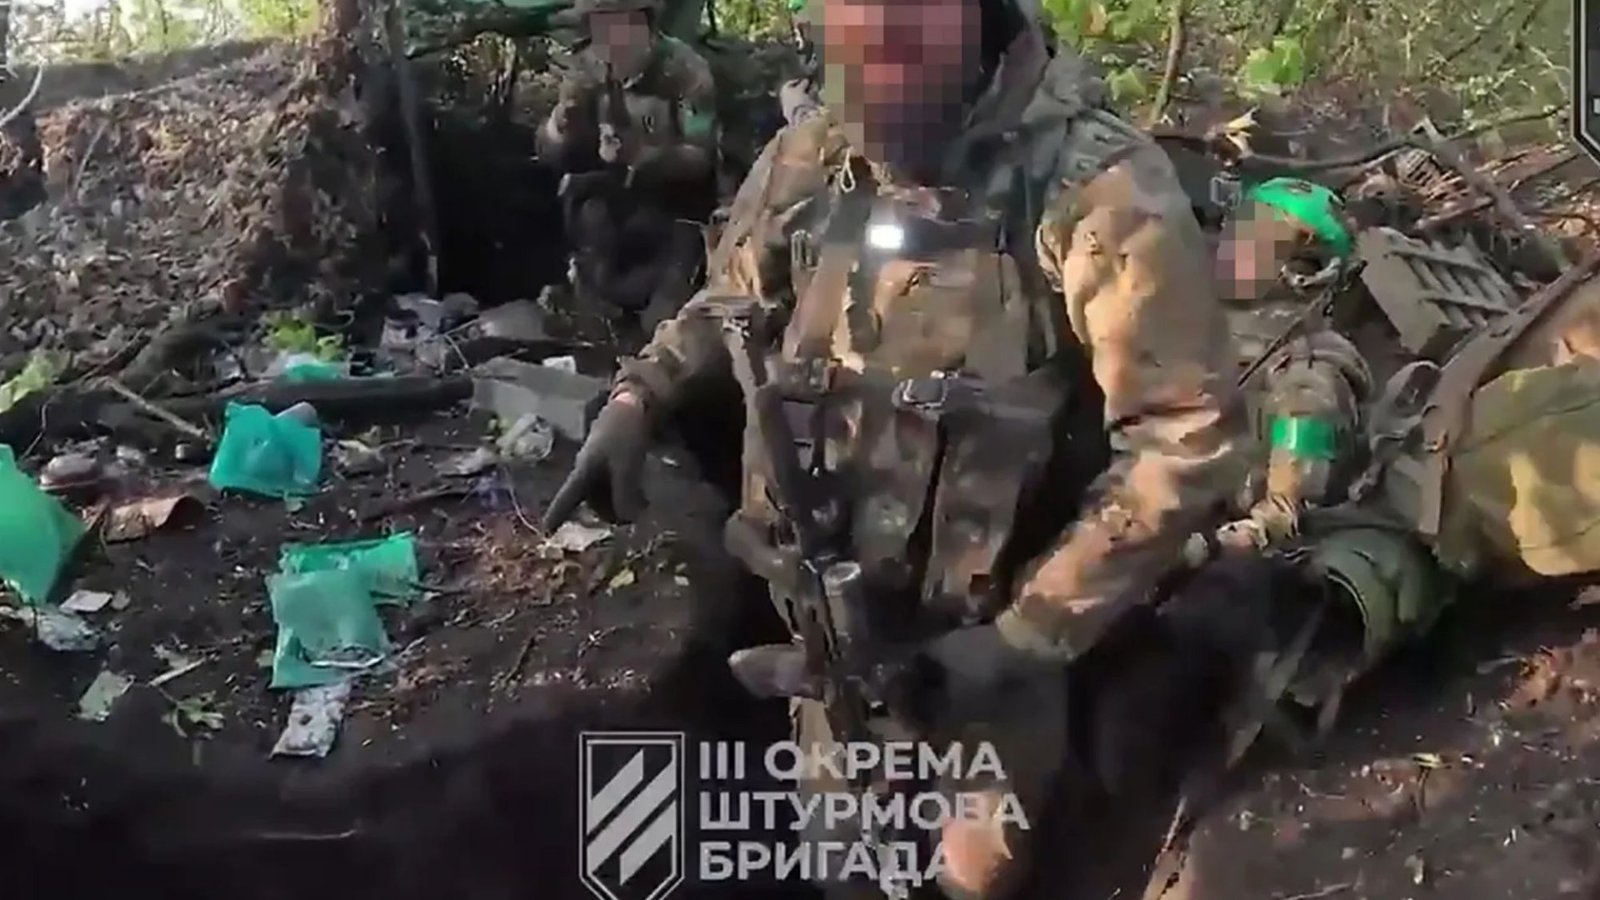 Russian soldiers seen surrendering when their trenches were overrun in Ukraine